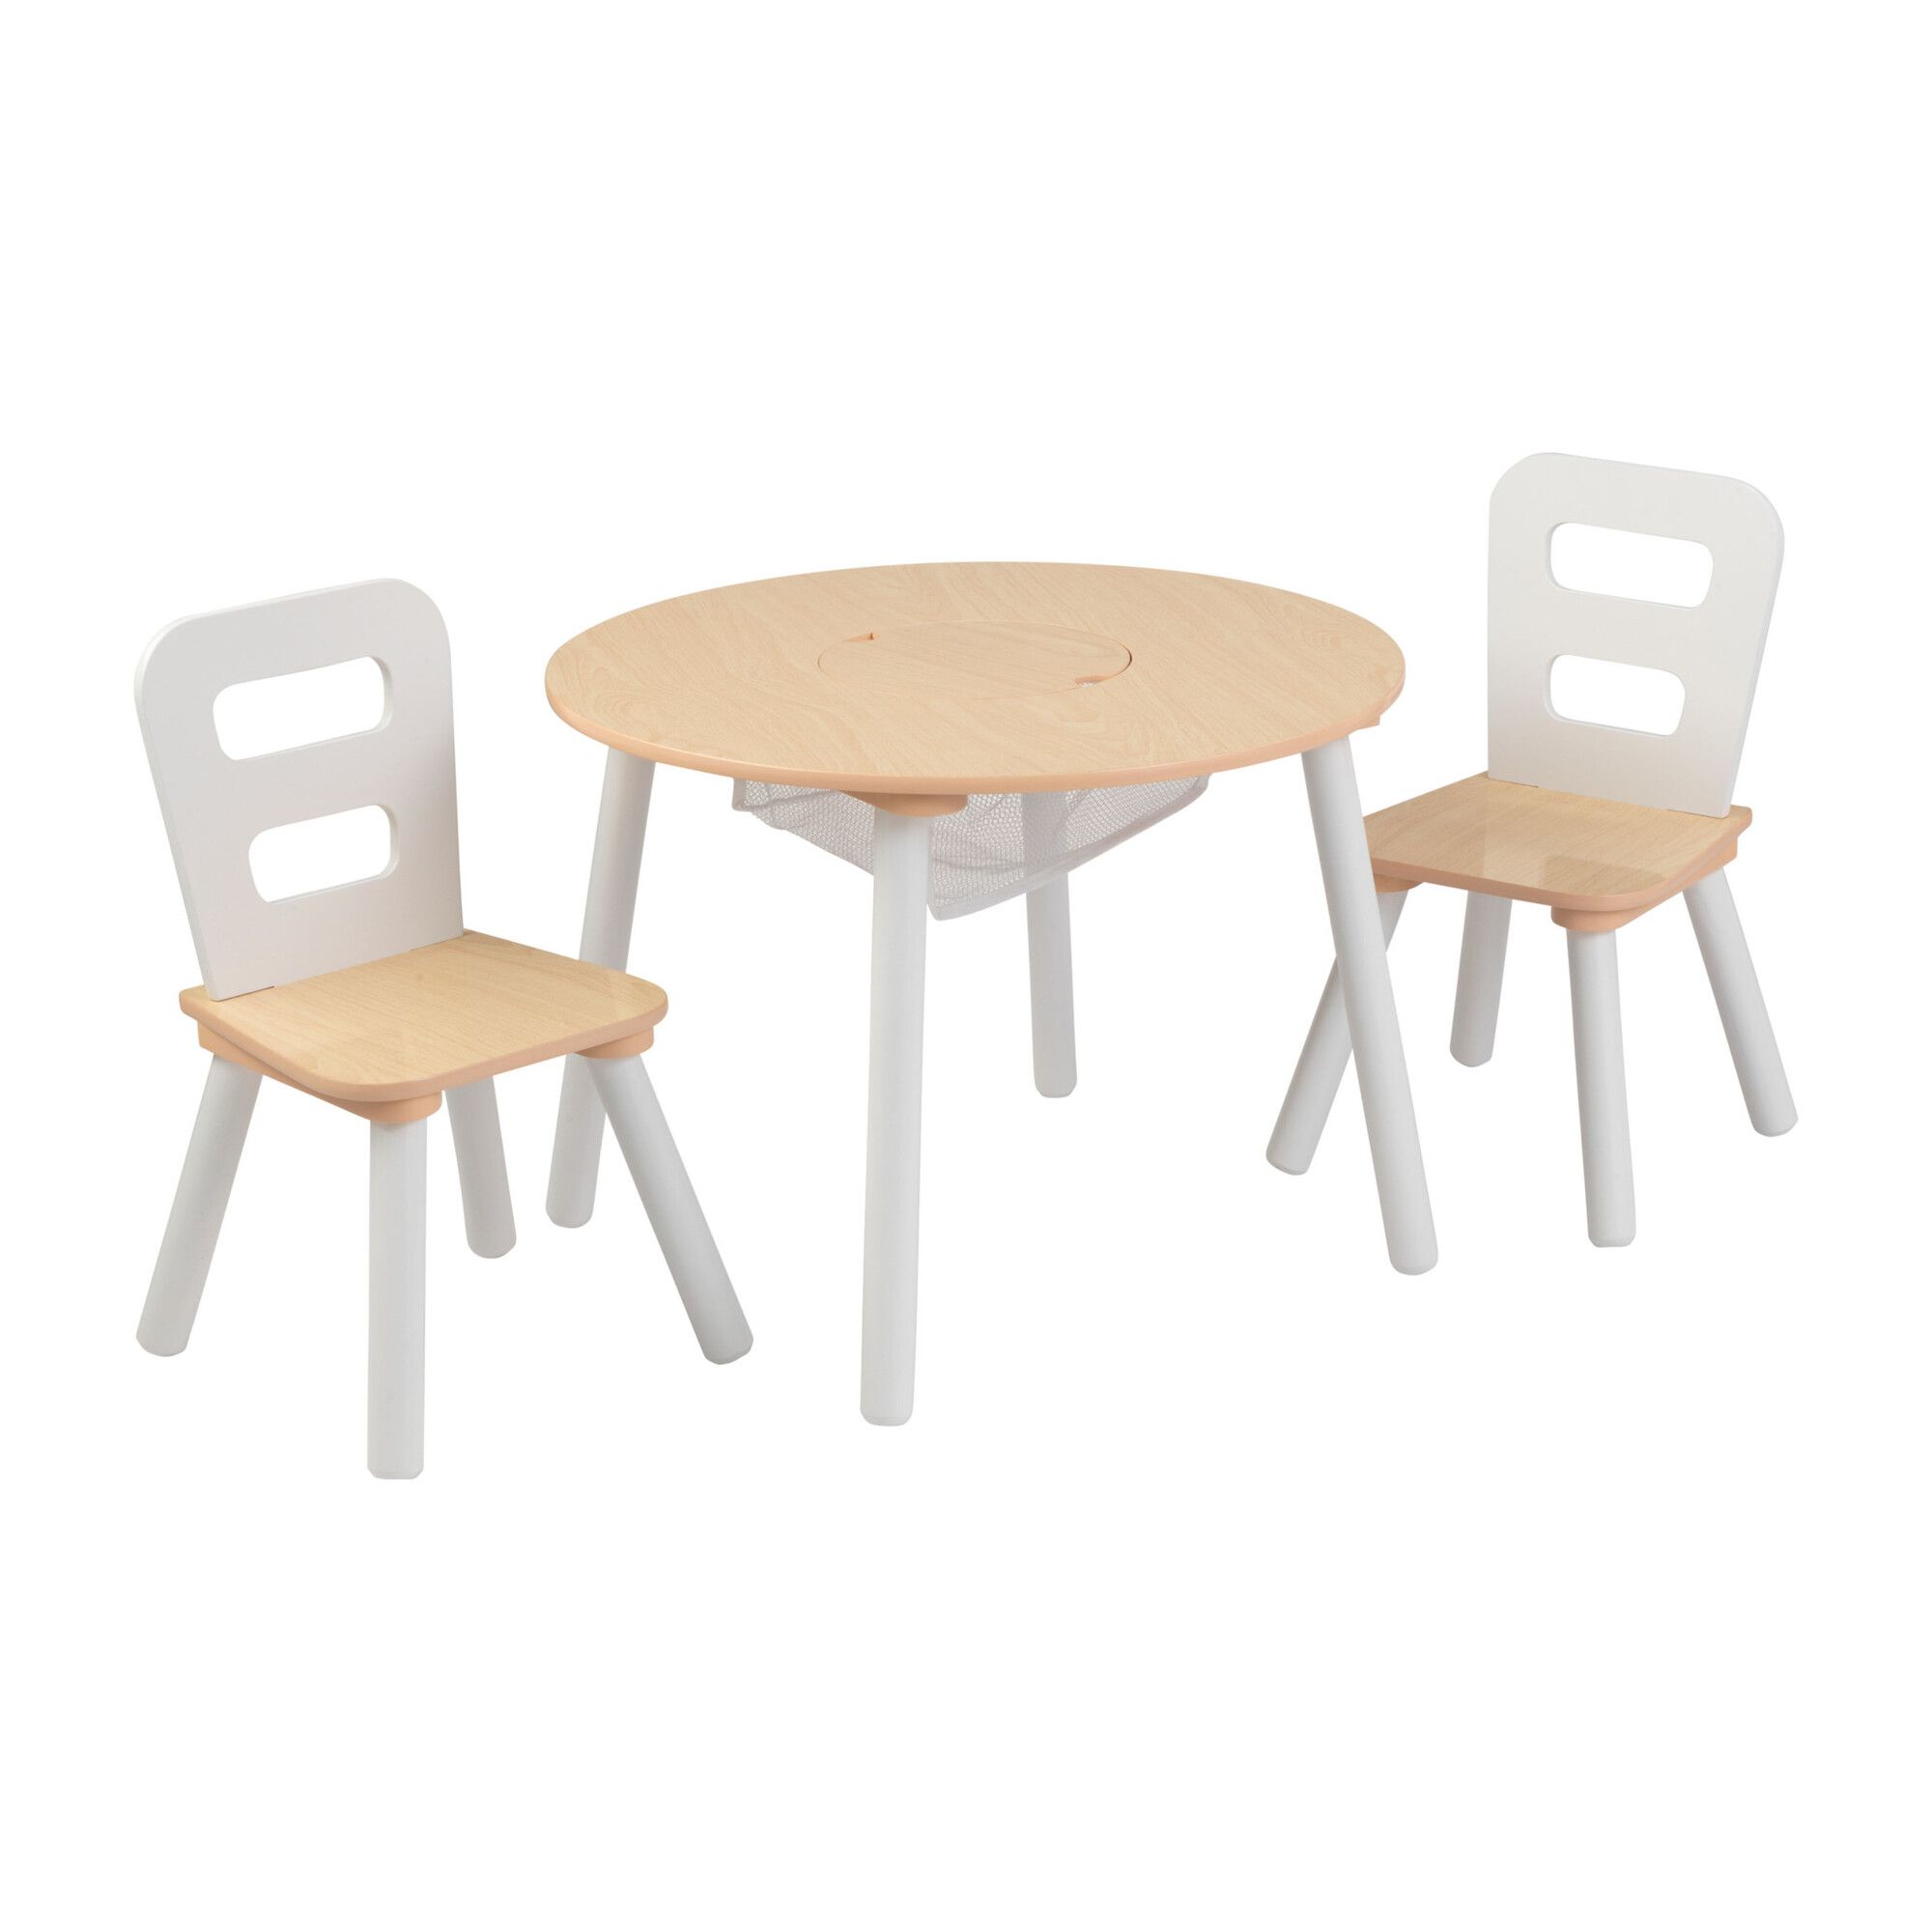 Round Storage Table and 2 Chair Set, Natural/White | Maisonette